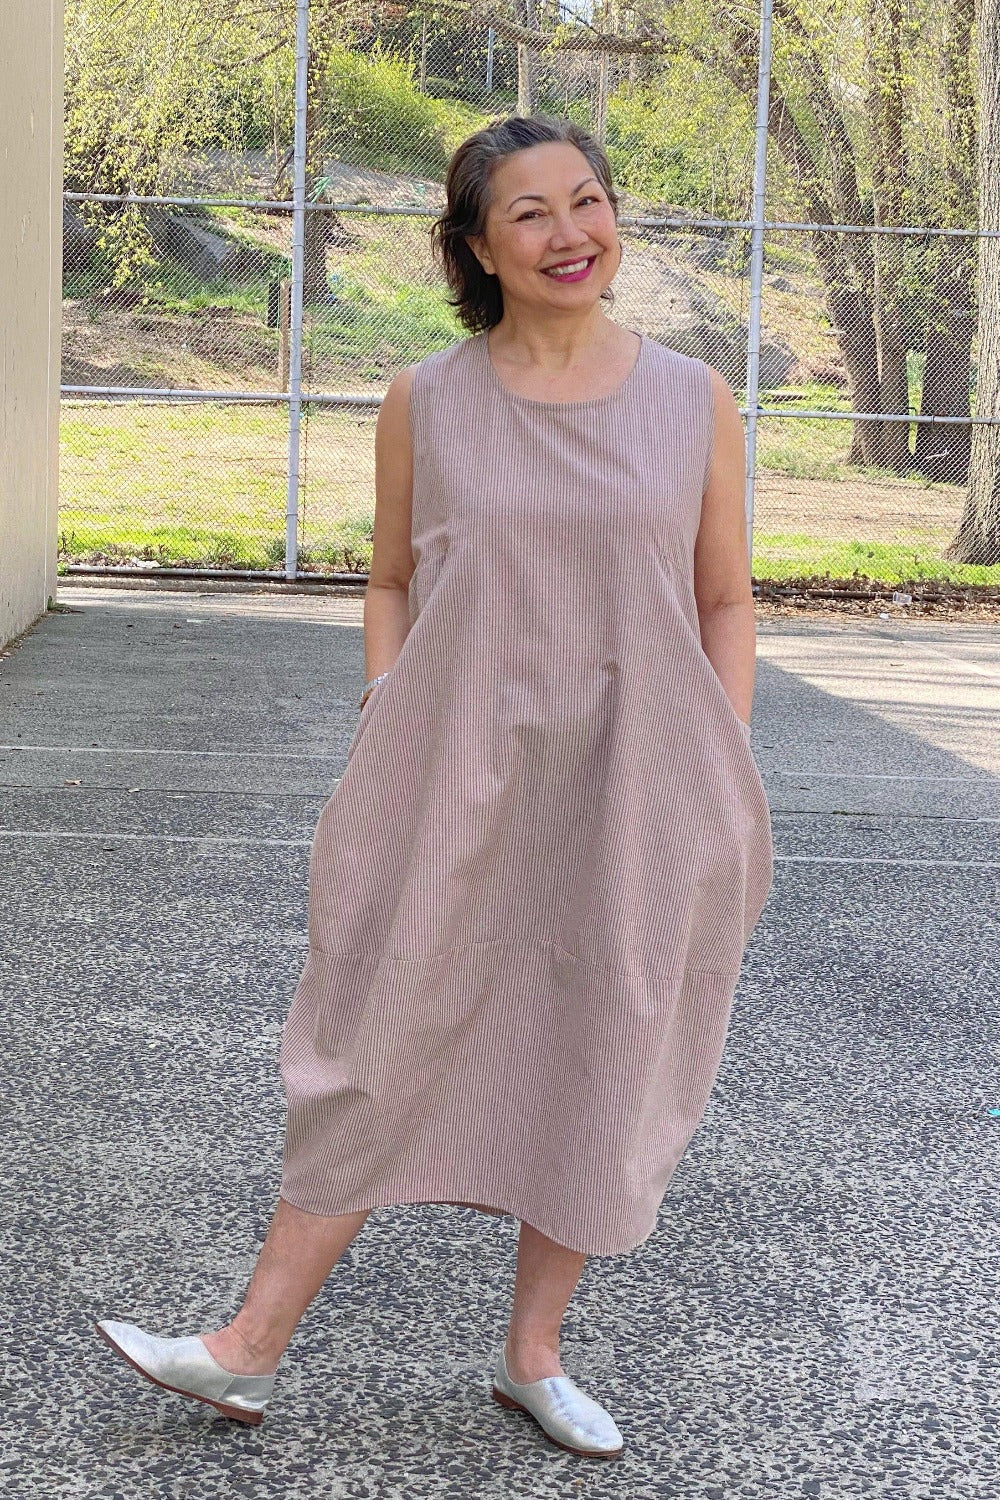 Smiling woman posing outsind wearing a tank dress with a slight bubble shape. It has 2 large front pockets and is a mocha colored seersucker fabric.